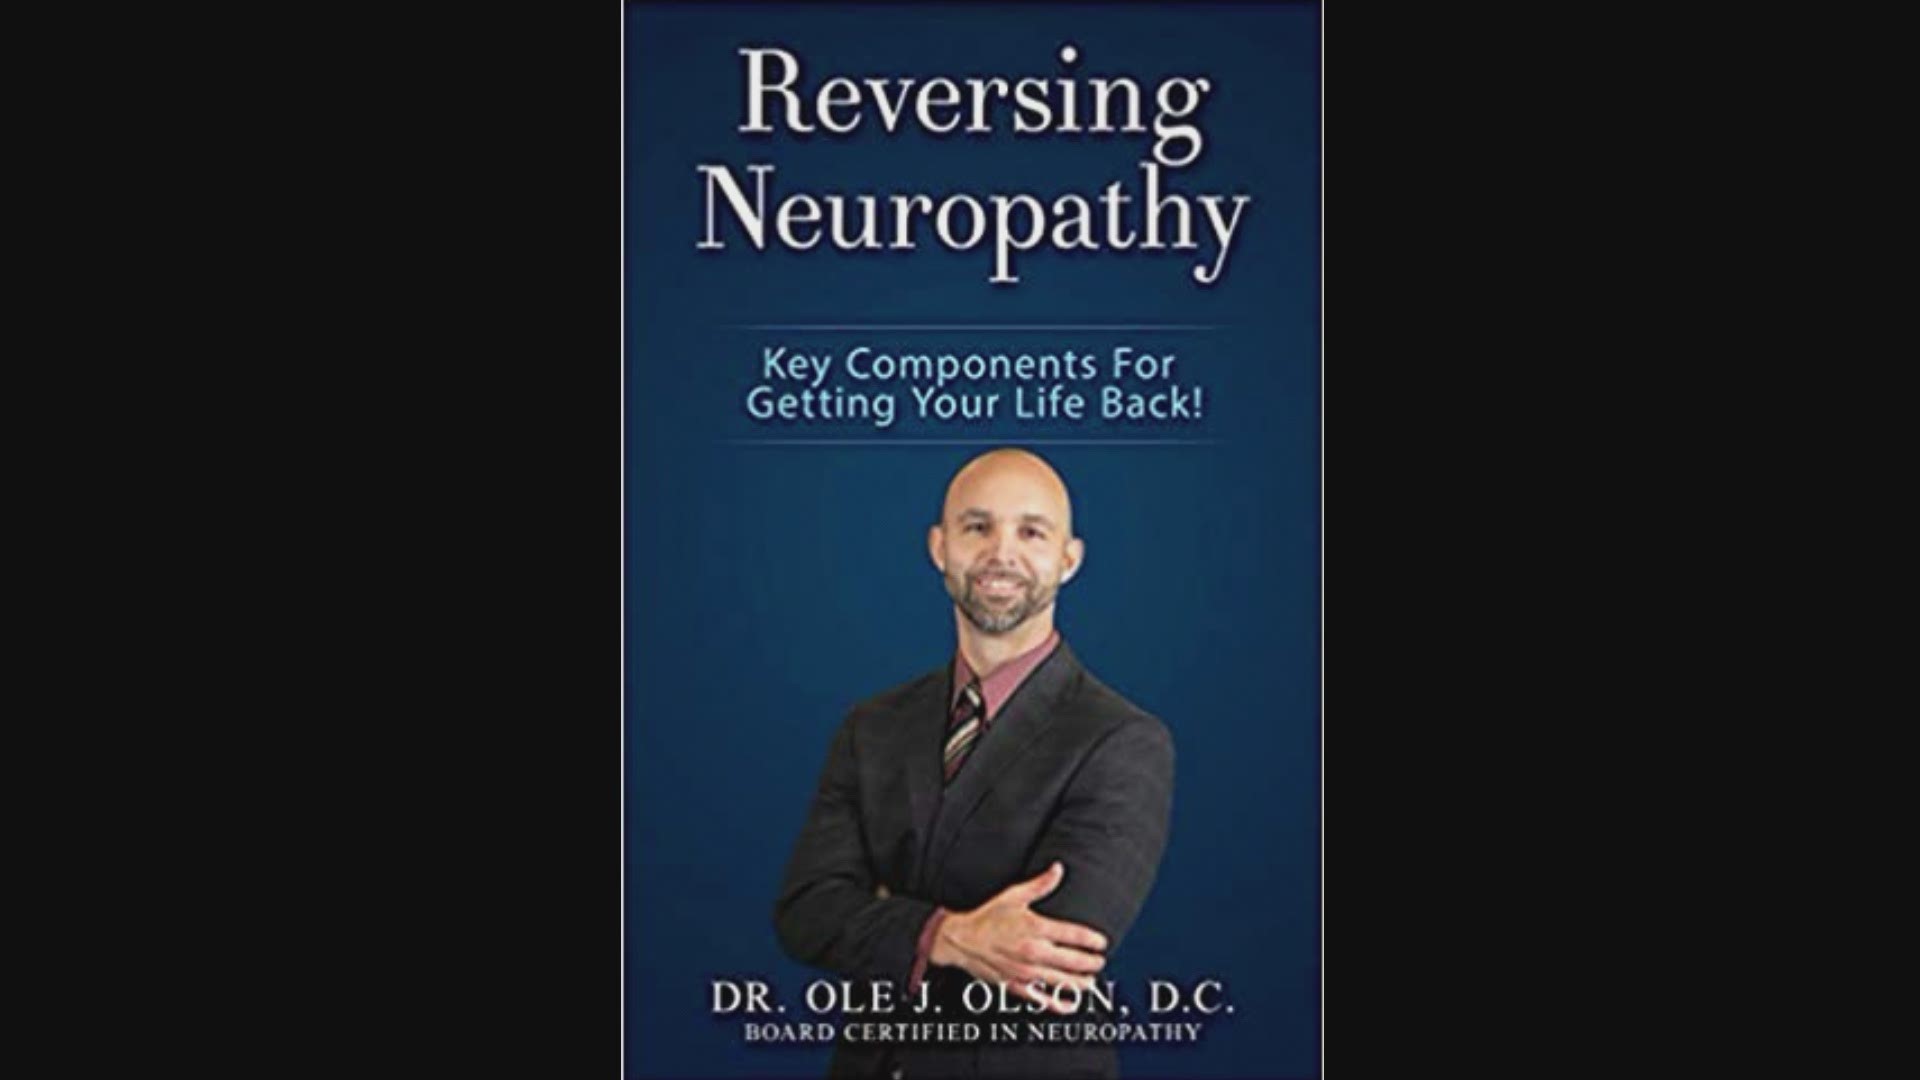 Dr. Ole Olson has a different approach to treating Peripheral Neuropathy and is offering a FREE Seminar & FREE copy of his book "Reversing Neuropathy" | PAID CONTENT